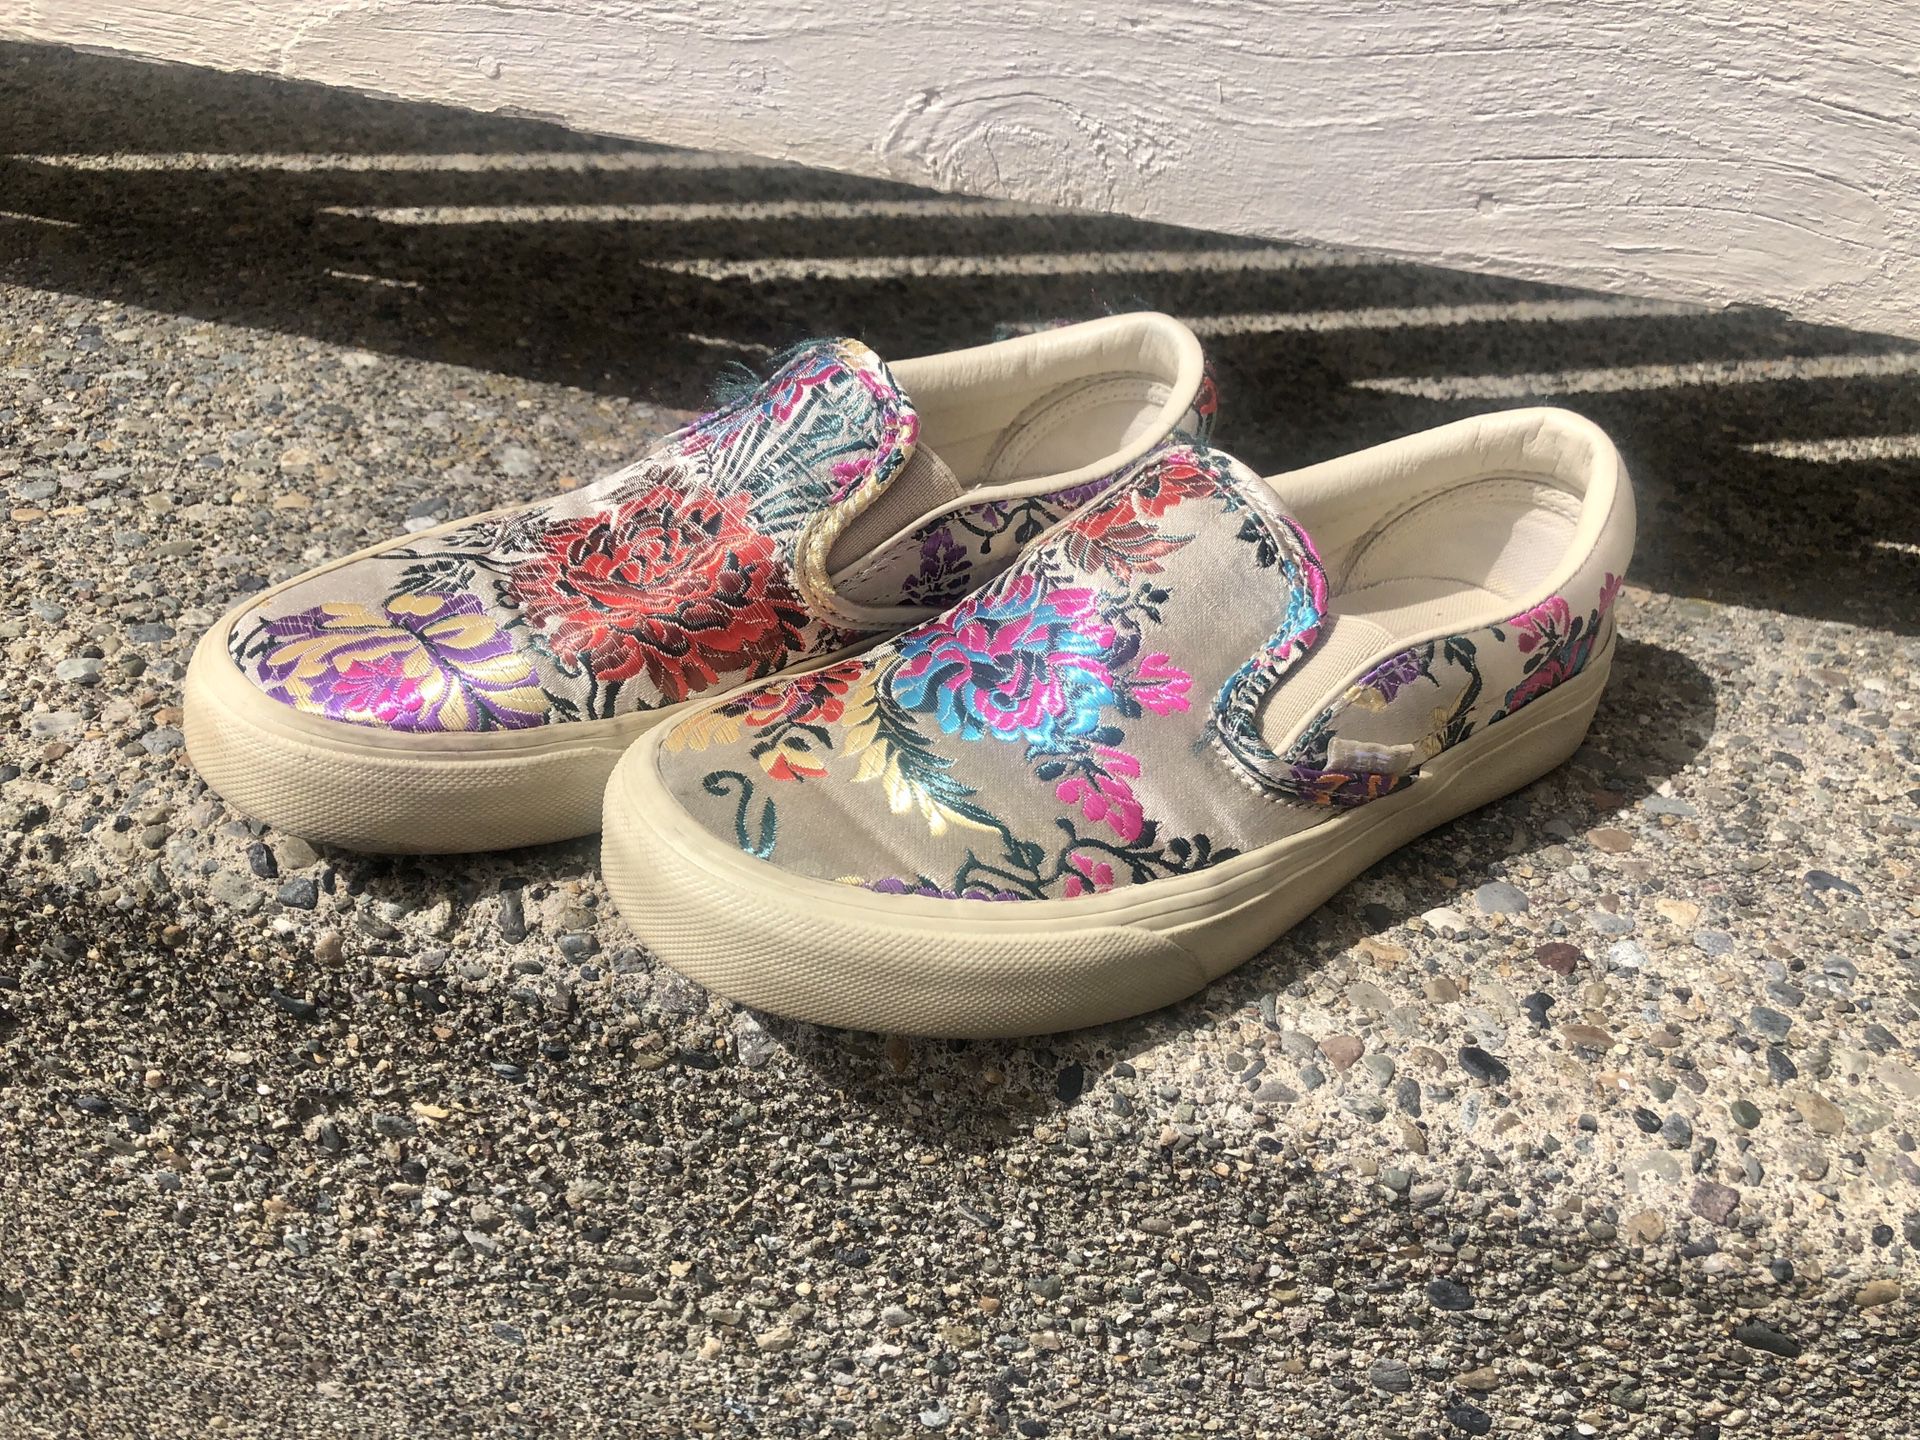 Super Cute Embroidered Vans Shoes*Size 5.5* Embroidery frays a bit. You can trim it and they still look great!